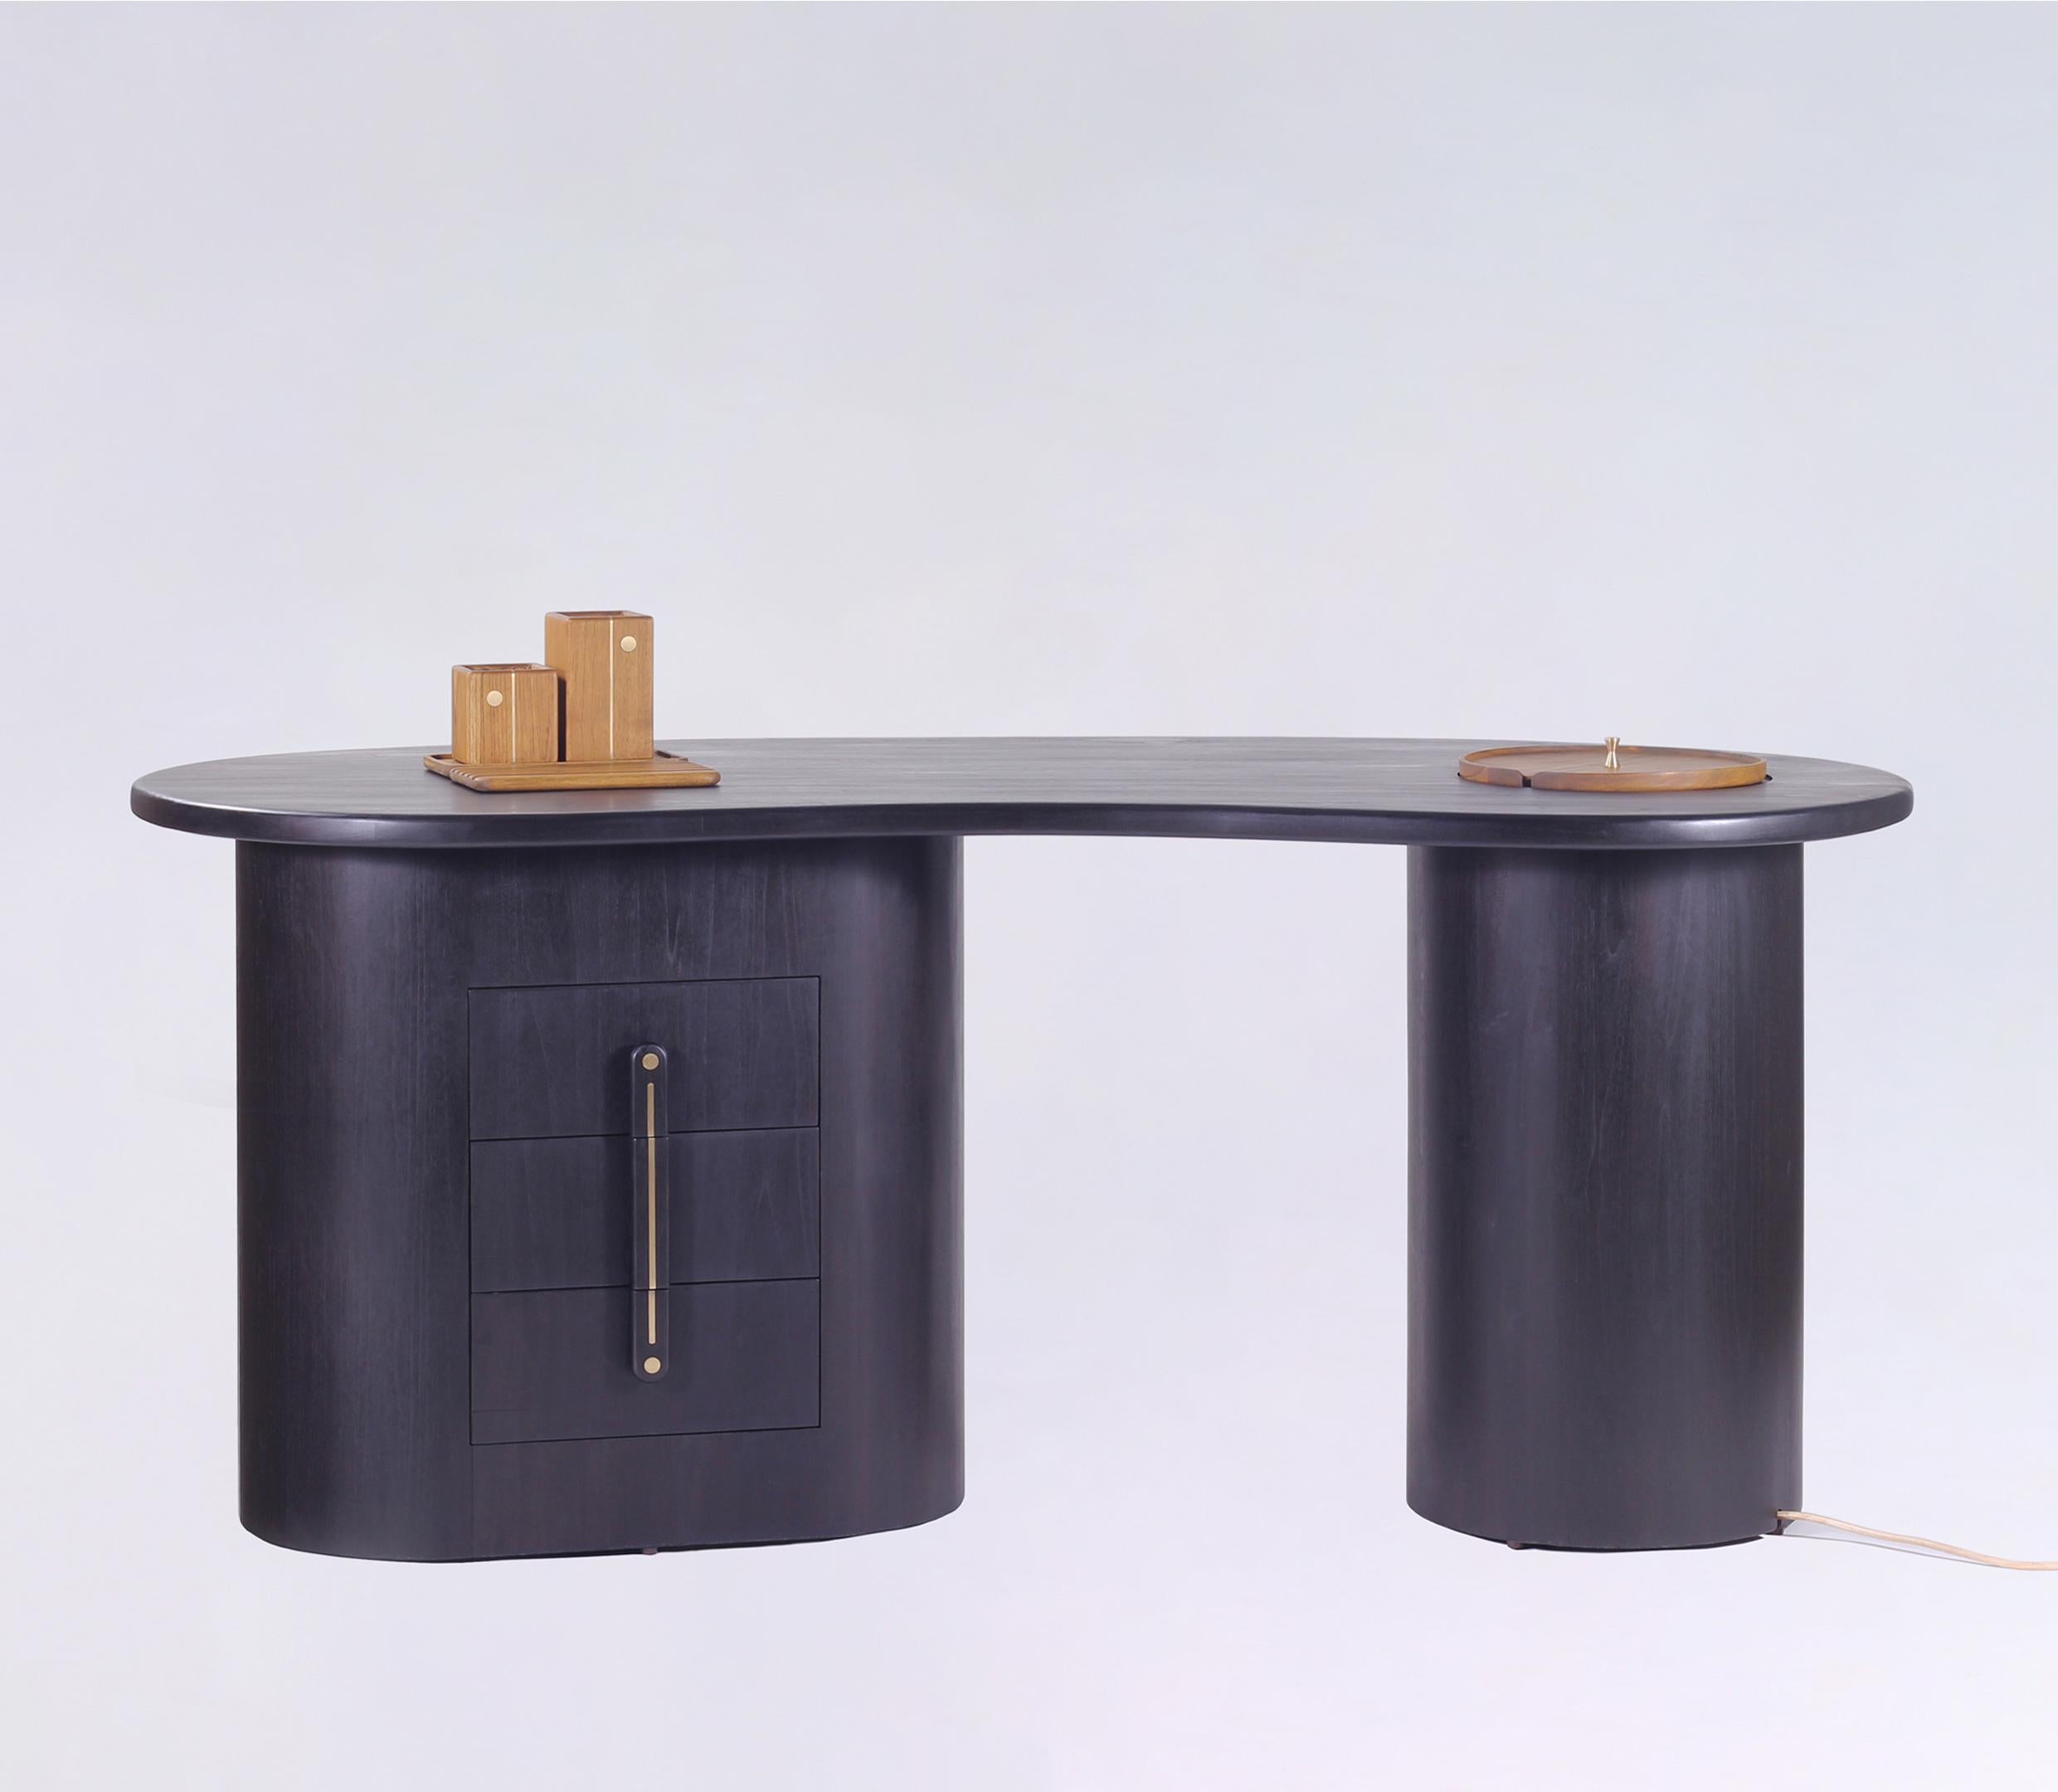 The Jazba work/writing desk table in solid Oak, is designed thoughtfully to address all the needs in your study/productive spaces. The organic kidney bean shaped top and cylindrical bases of the desk create a minimal yet sculptural aesthetic.